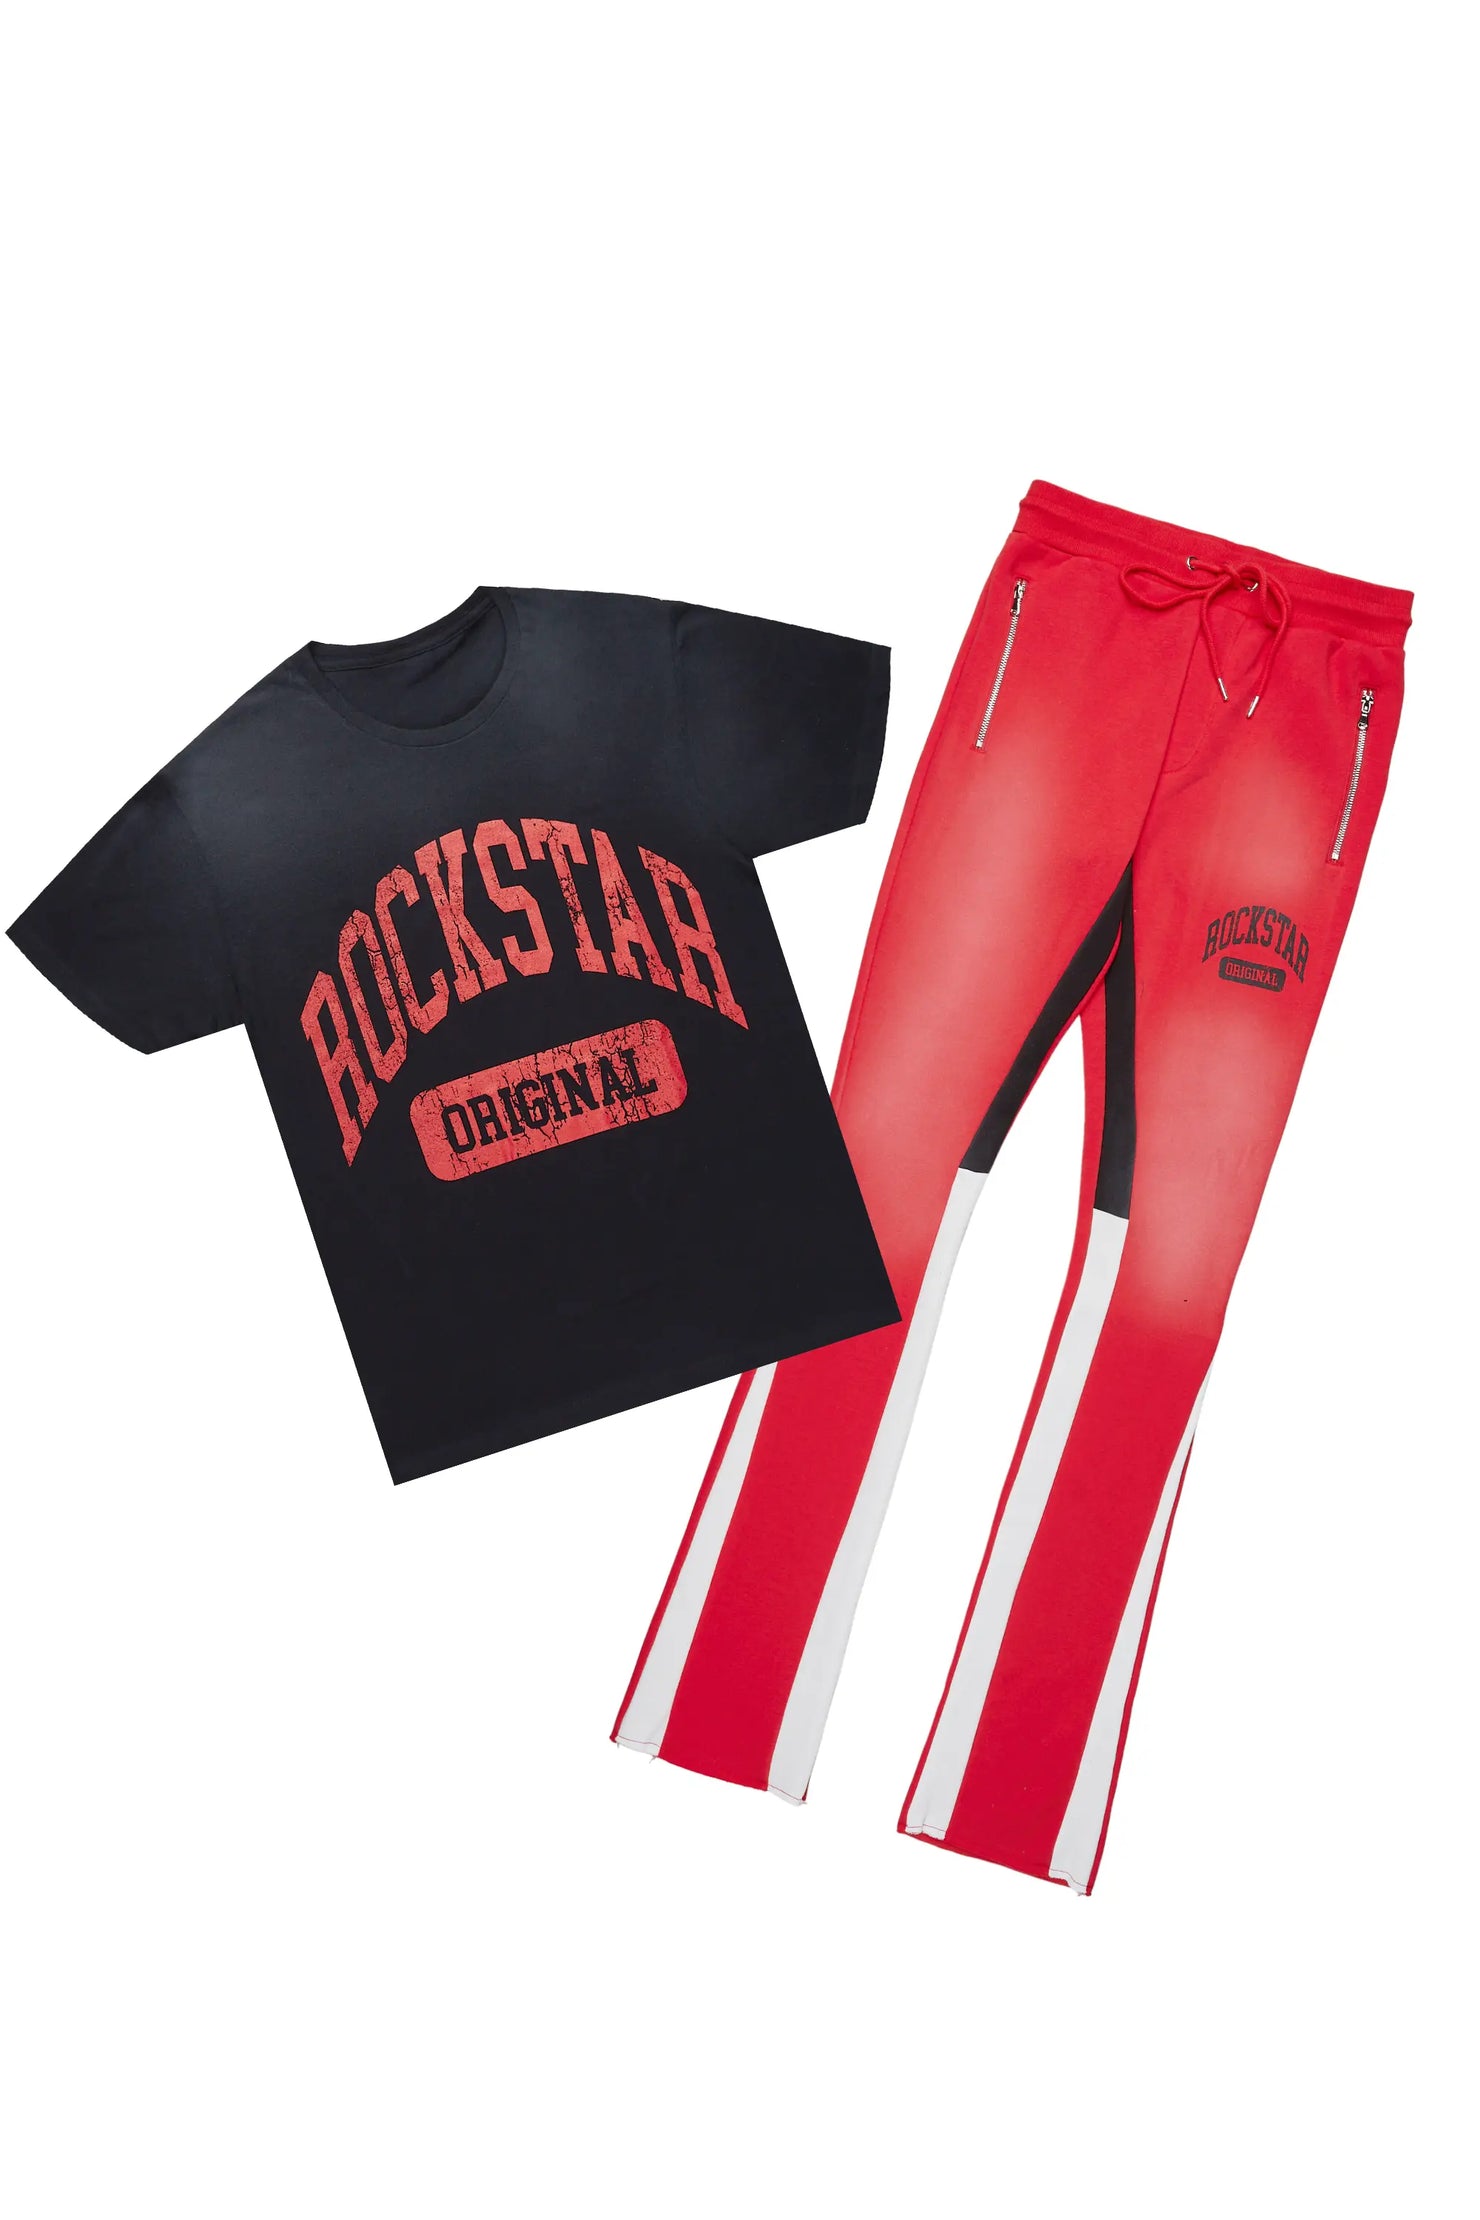 Members Black/Red T-Shirt/Stacked Flare Pant Set